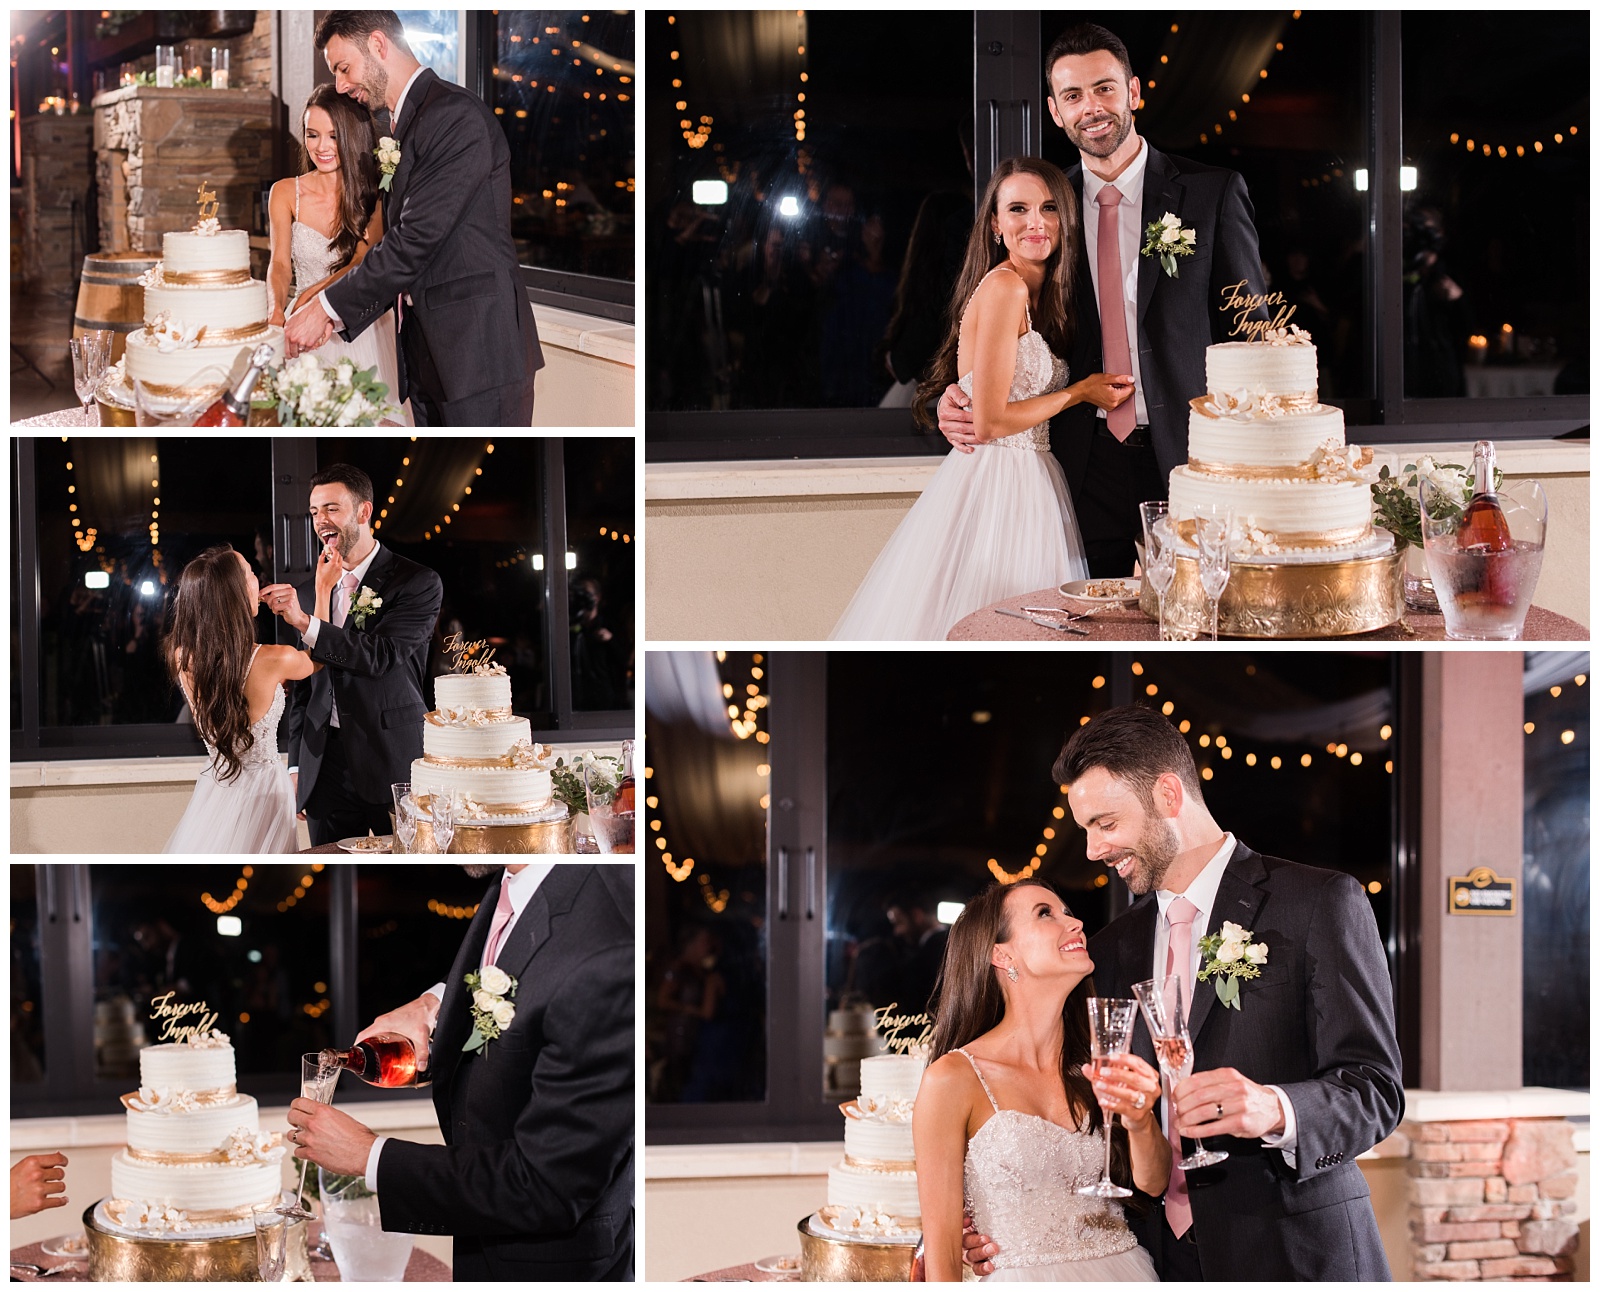 Tasteful and fun cake cutting ending with a champagne toast